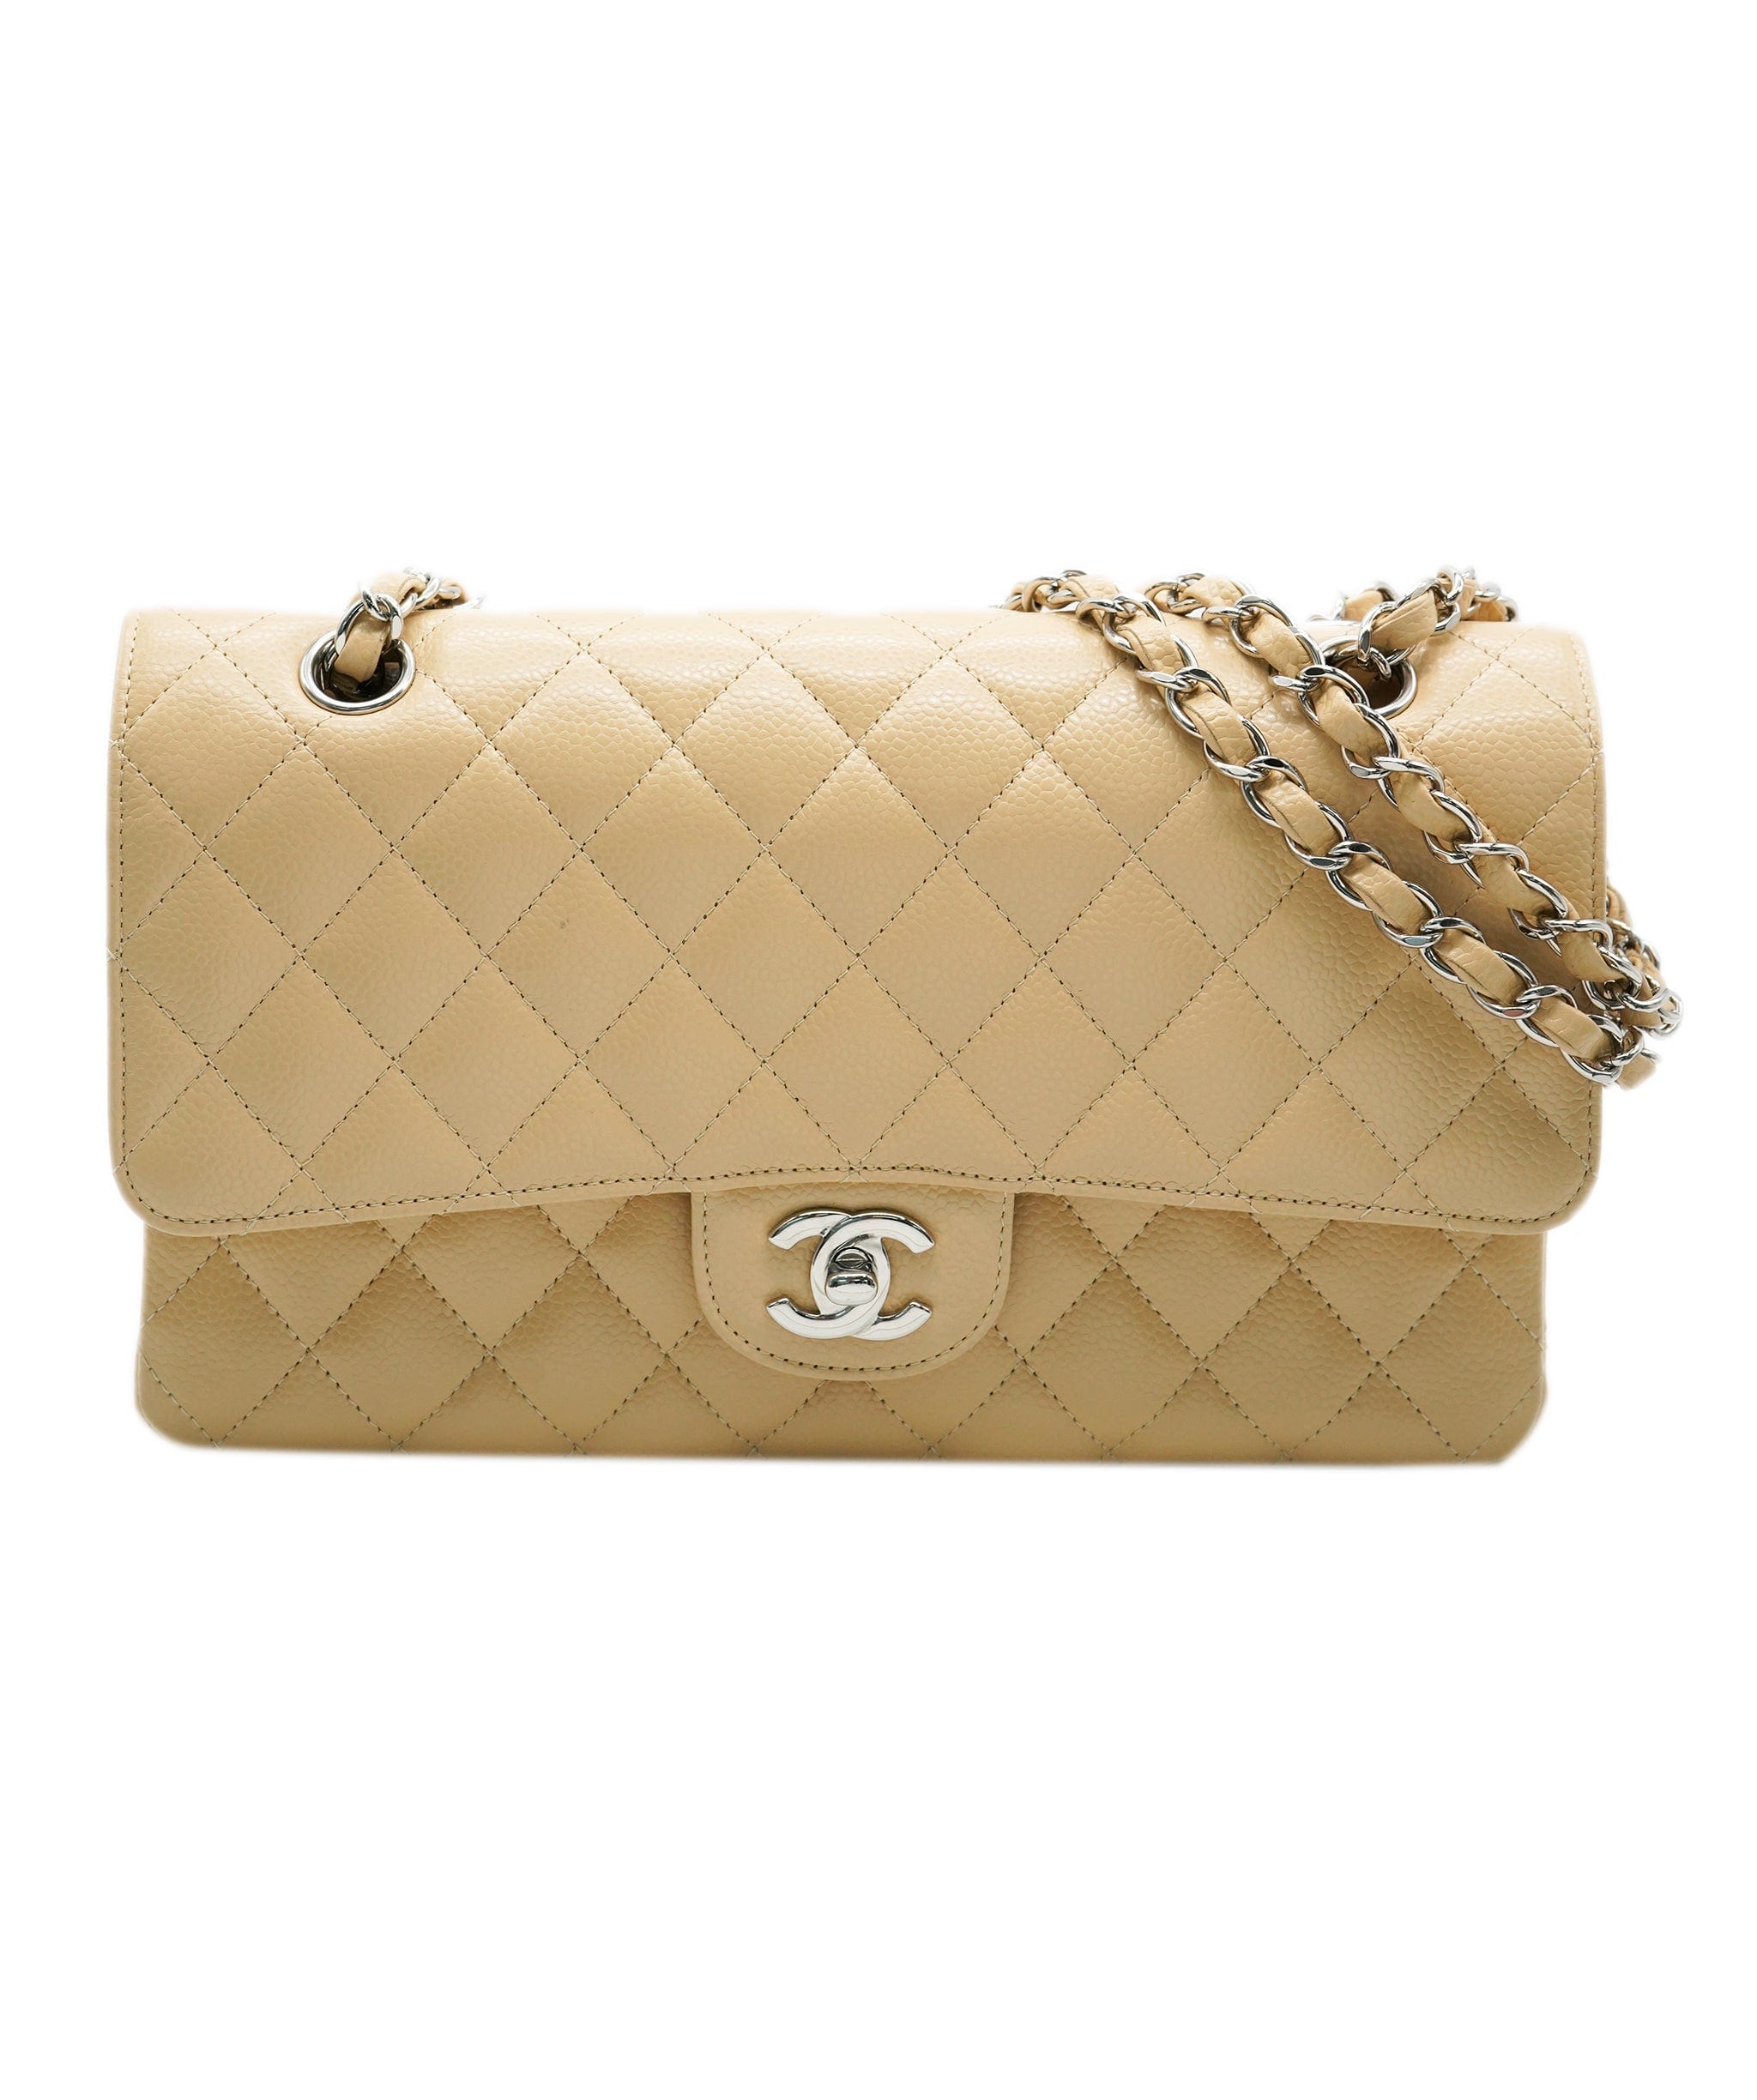 Chanel Chanel Classic Flap Beige Caviar with SHW -  ASL10223